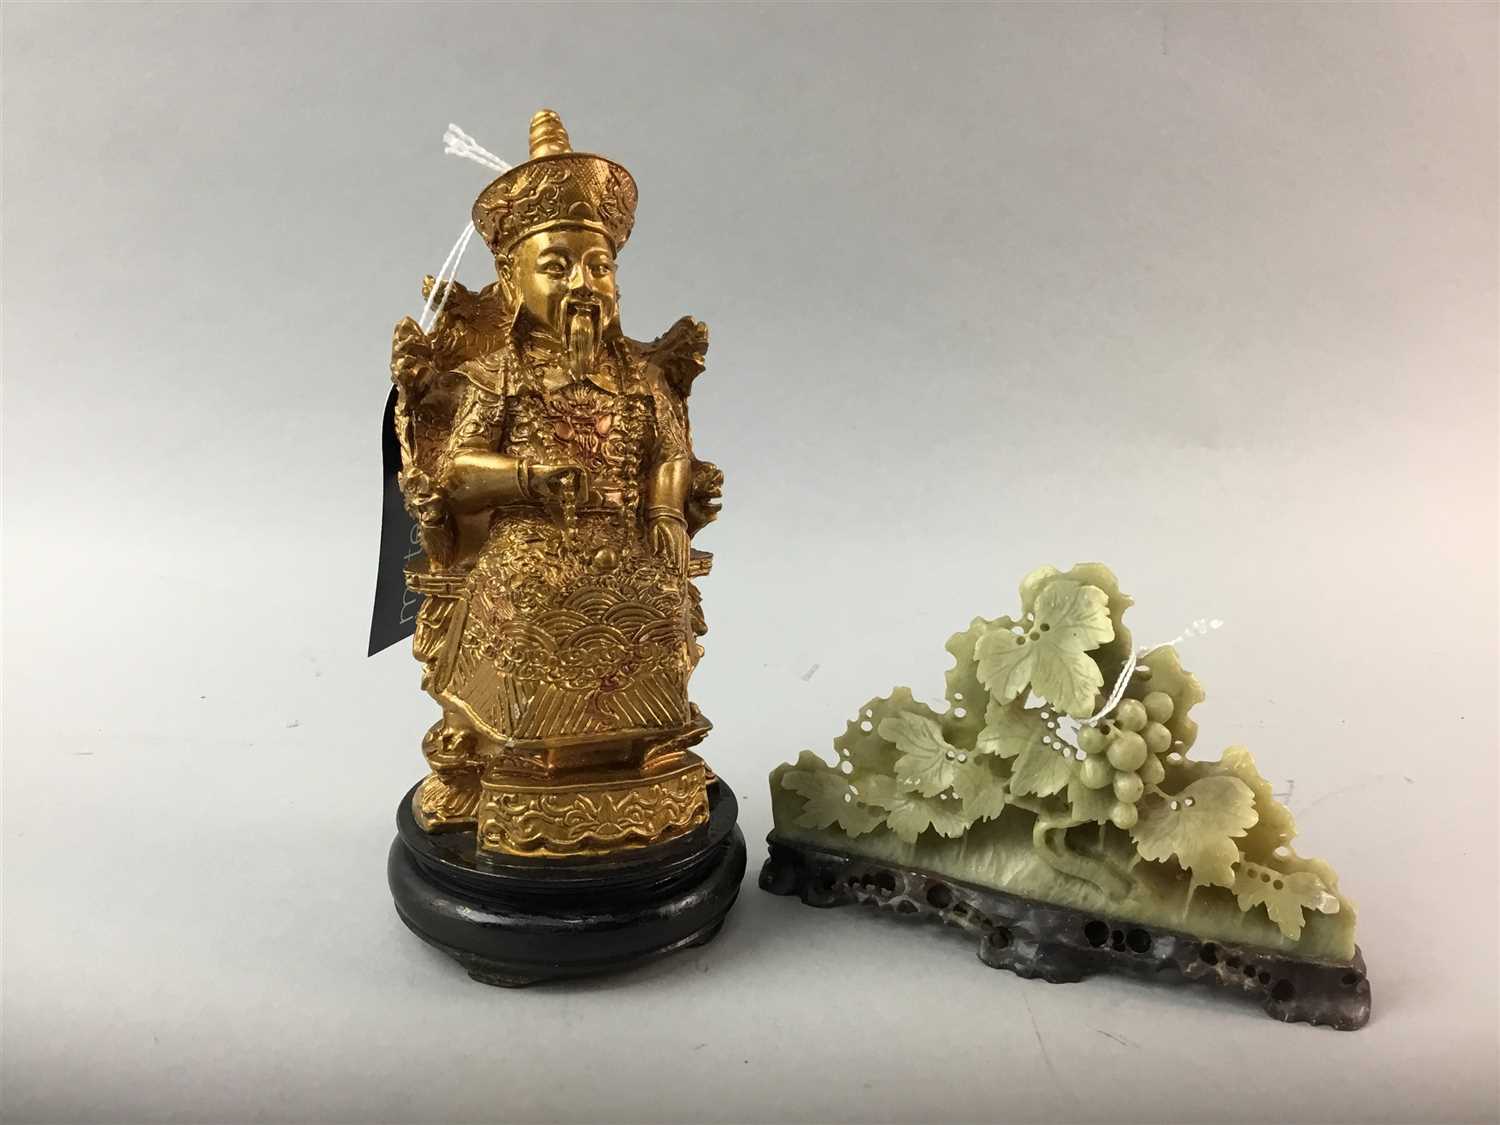 Lot 267 - AN EARLY 20TH CENTURY GILDED COMPOSITION FIGURE ALONG WITH A SOAPSTONE FIGURE